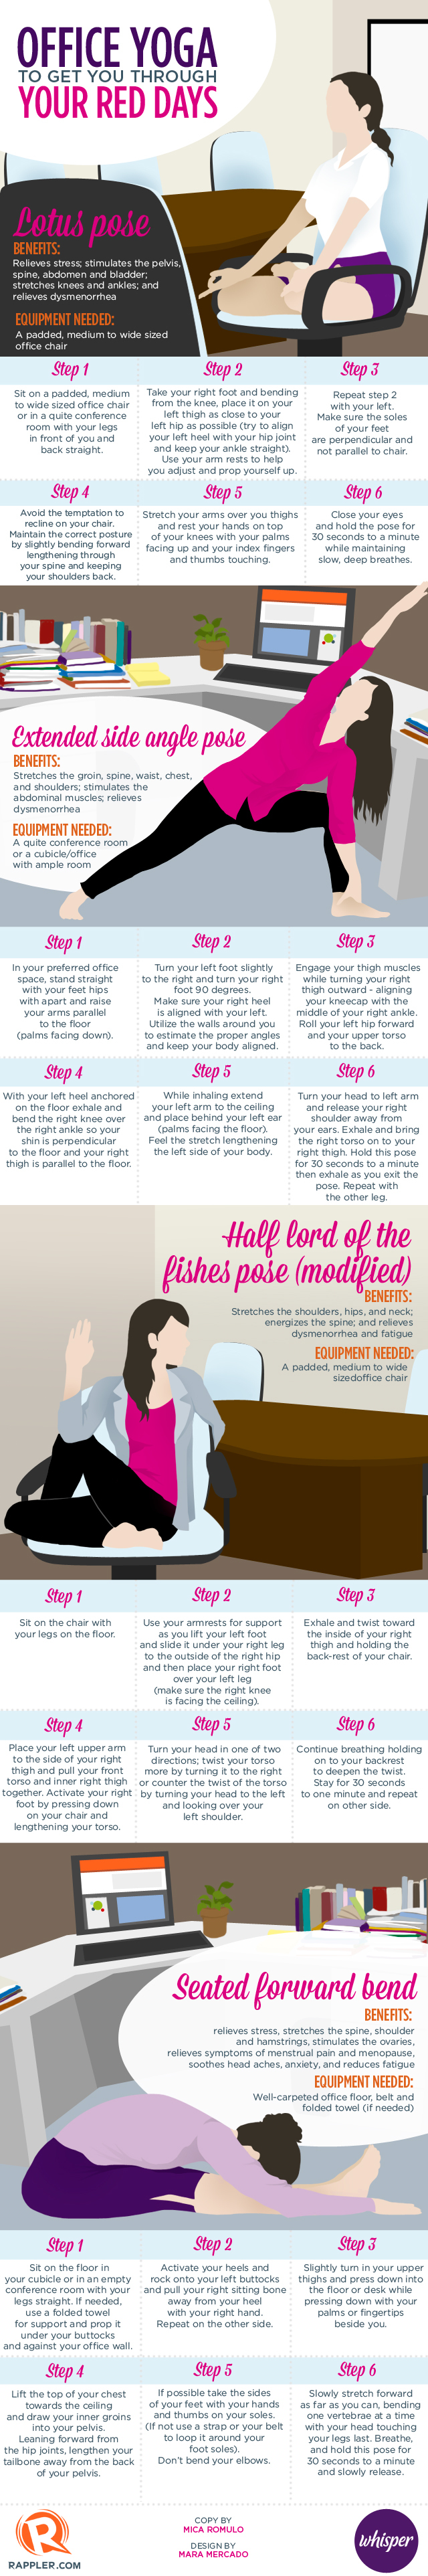 Infographic Office Yoga To Get You Through Your Red Days 